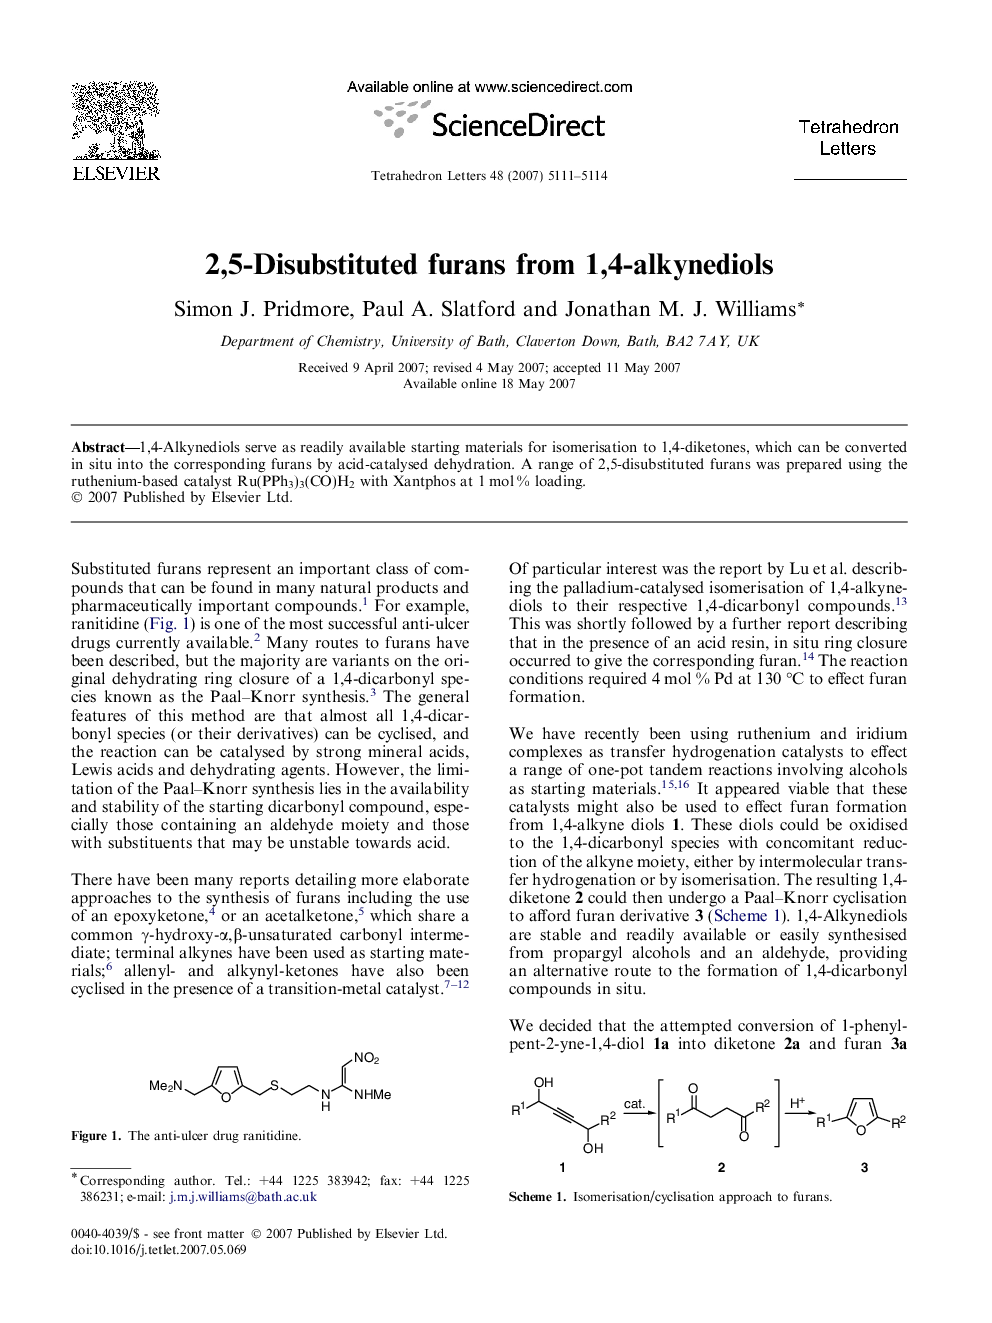 2,5-Disubstituted furans from 1,4-alkynediols